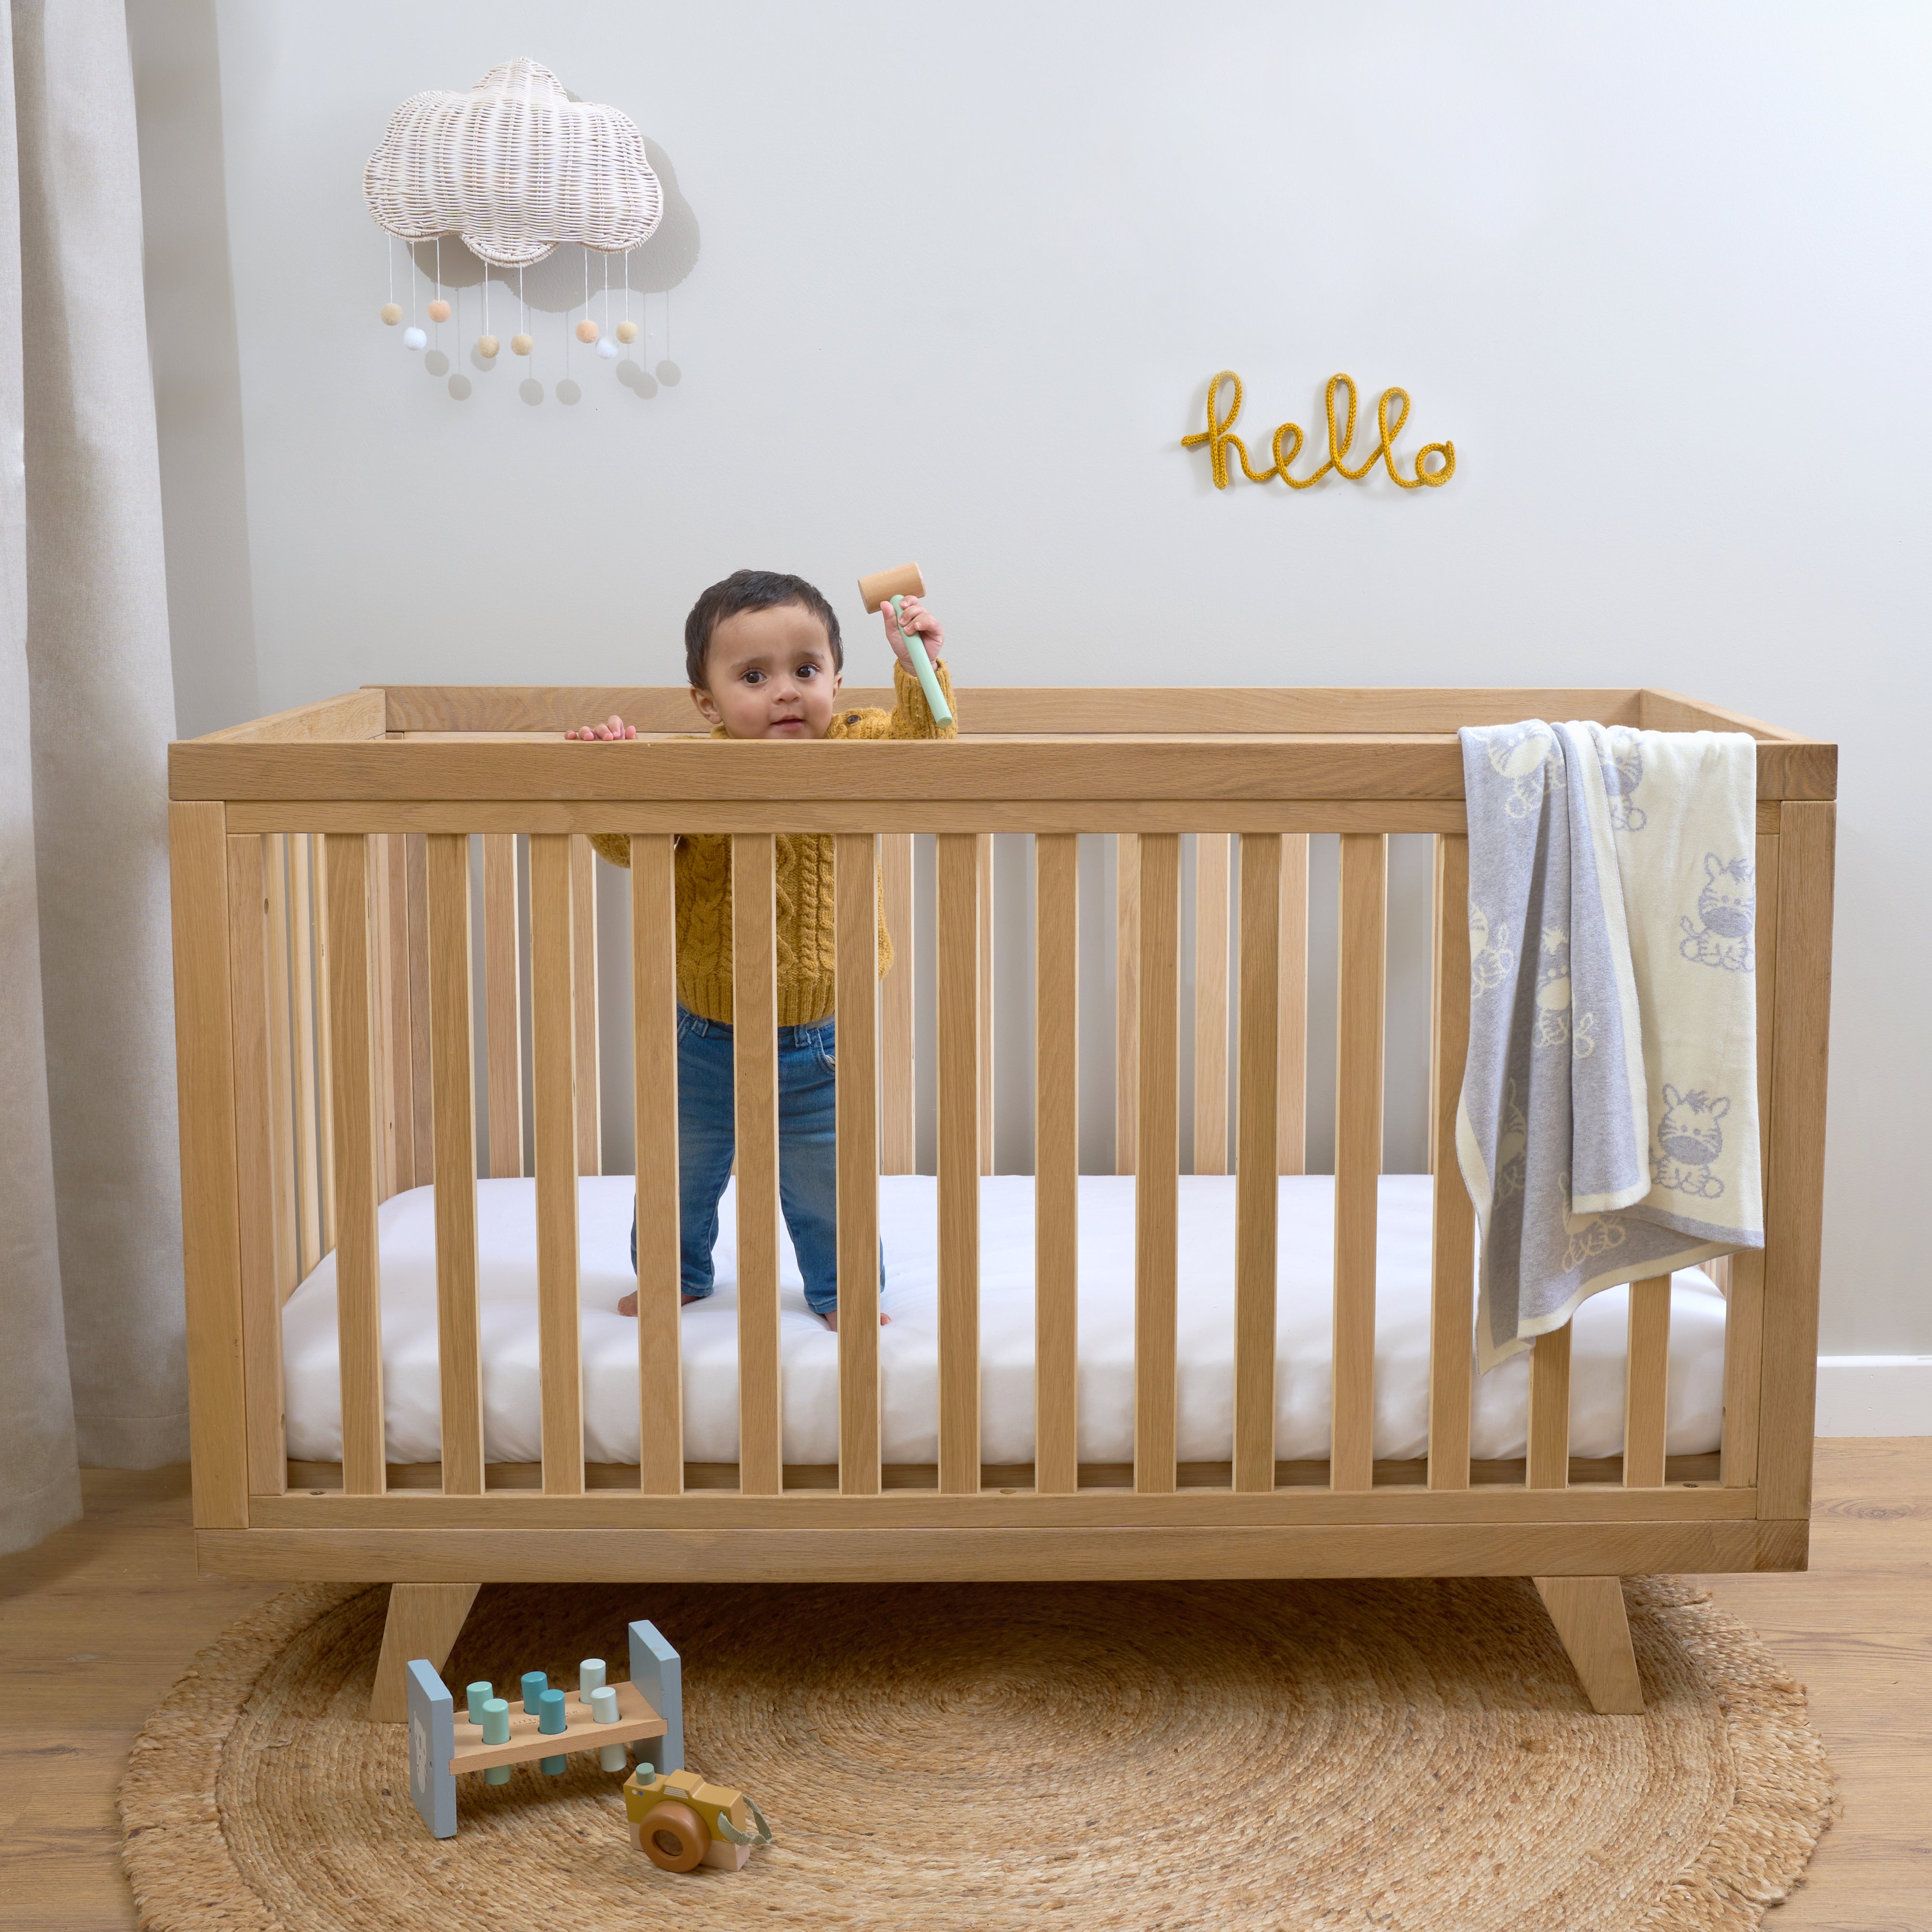 Toddler boy standing in the Natural Oak Cot Bed in baby room | Nursery Furniture - Clair de Lune UK